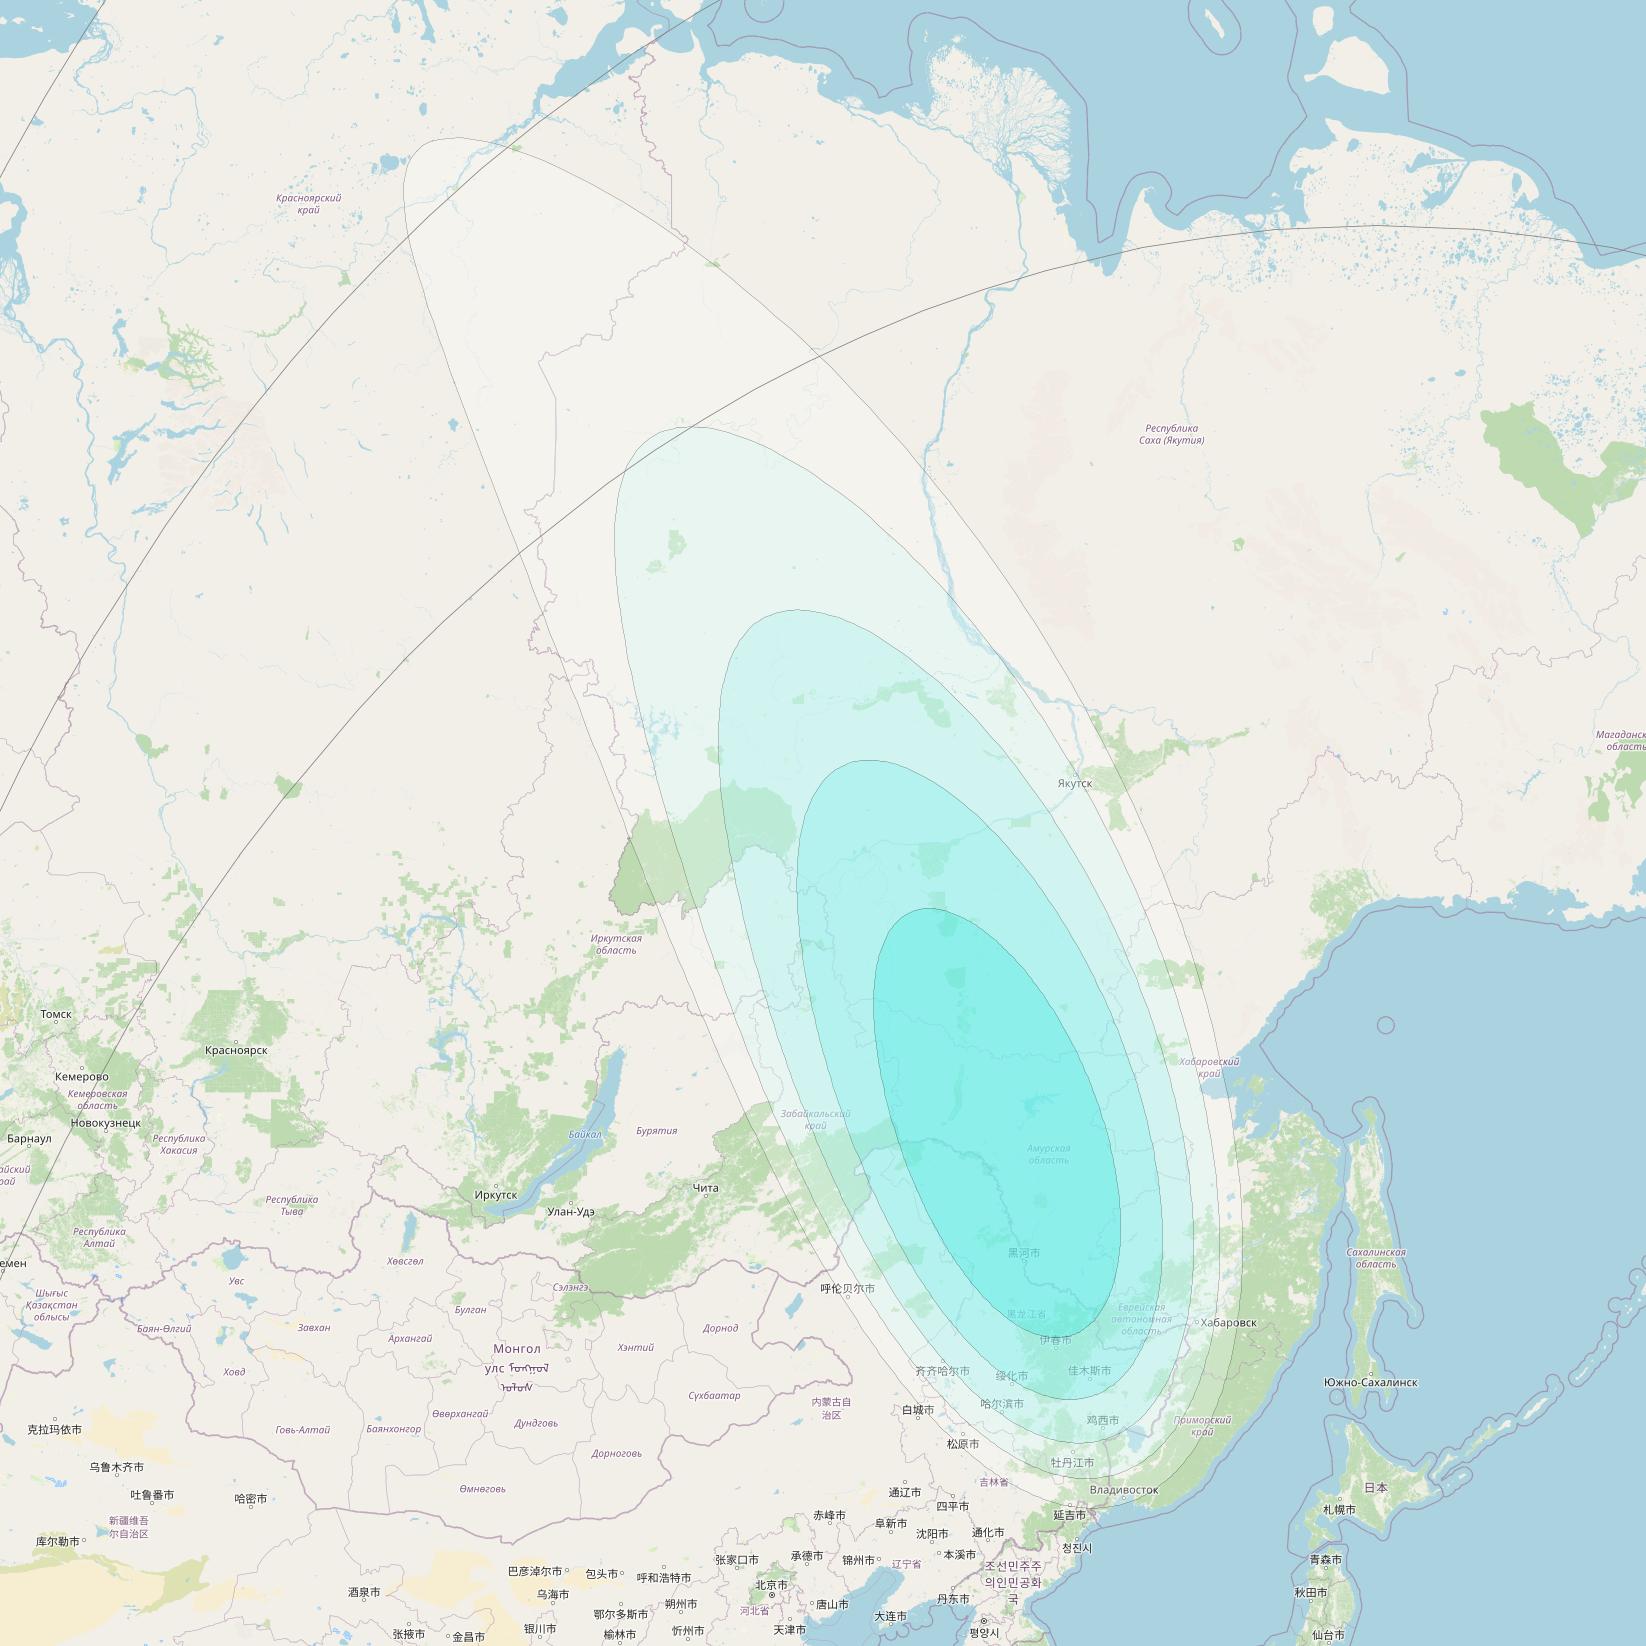 Inmarsat-4F1 at 143° E downlink L-band S081 User Spot beam coverage map